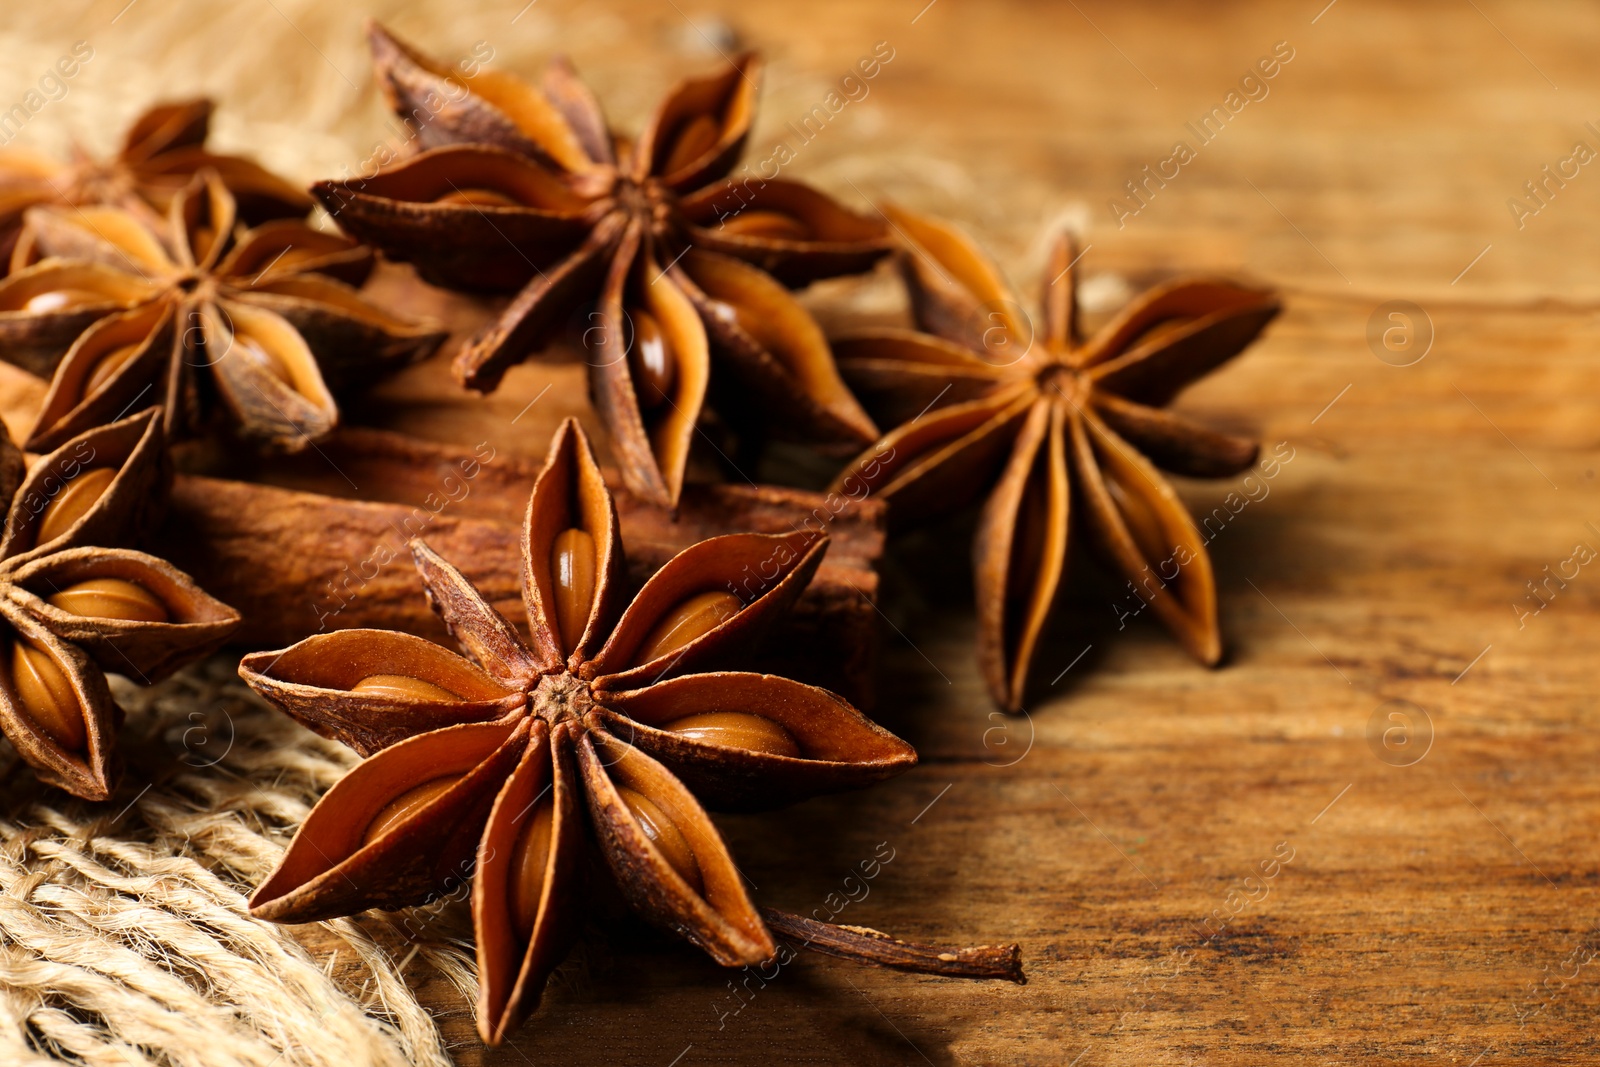 Photo of Aromatic anise stars and cinnamon sticks on wooden table, closeup